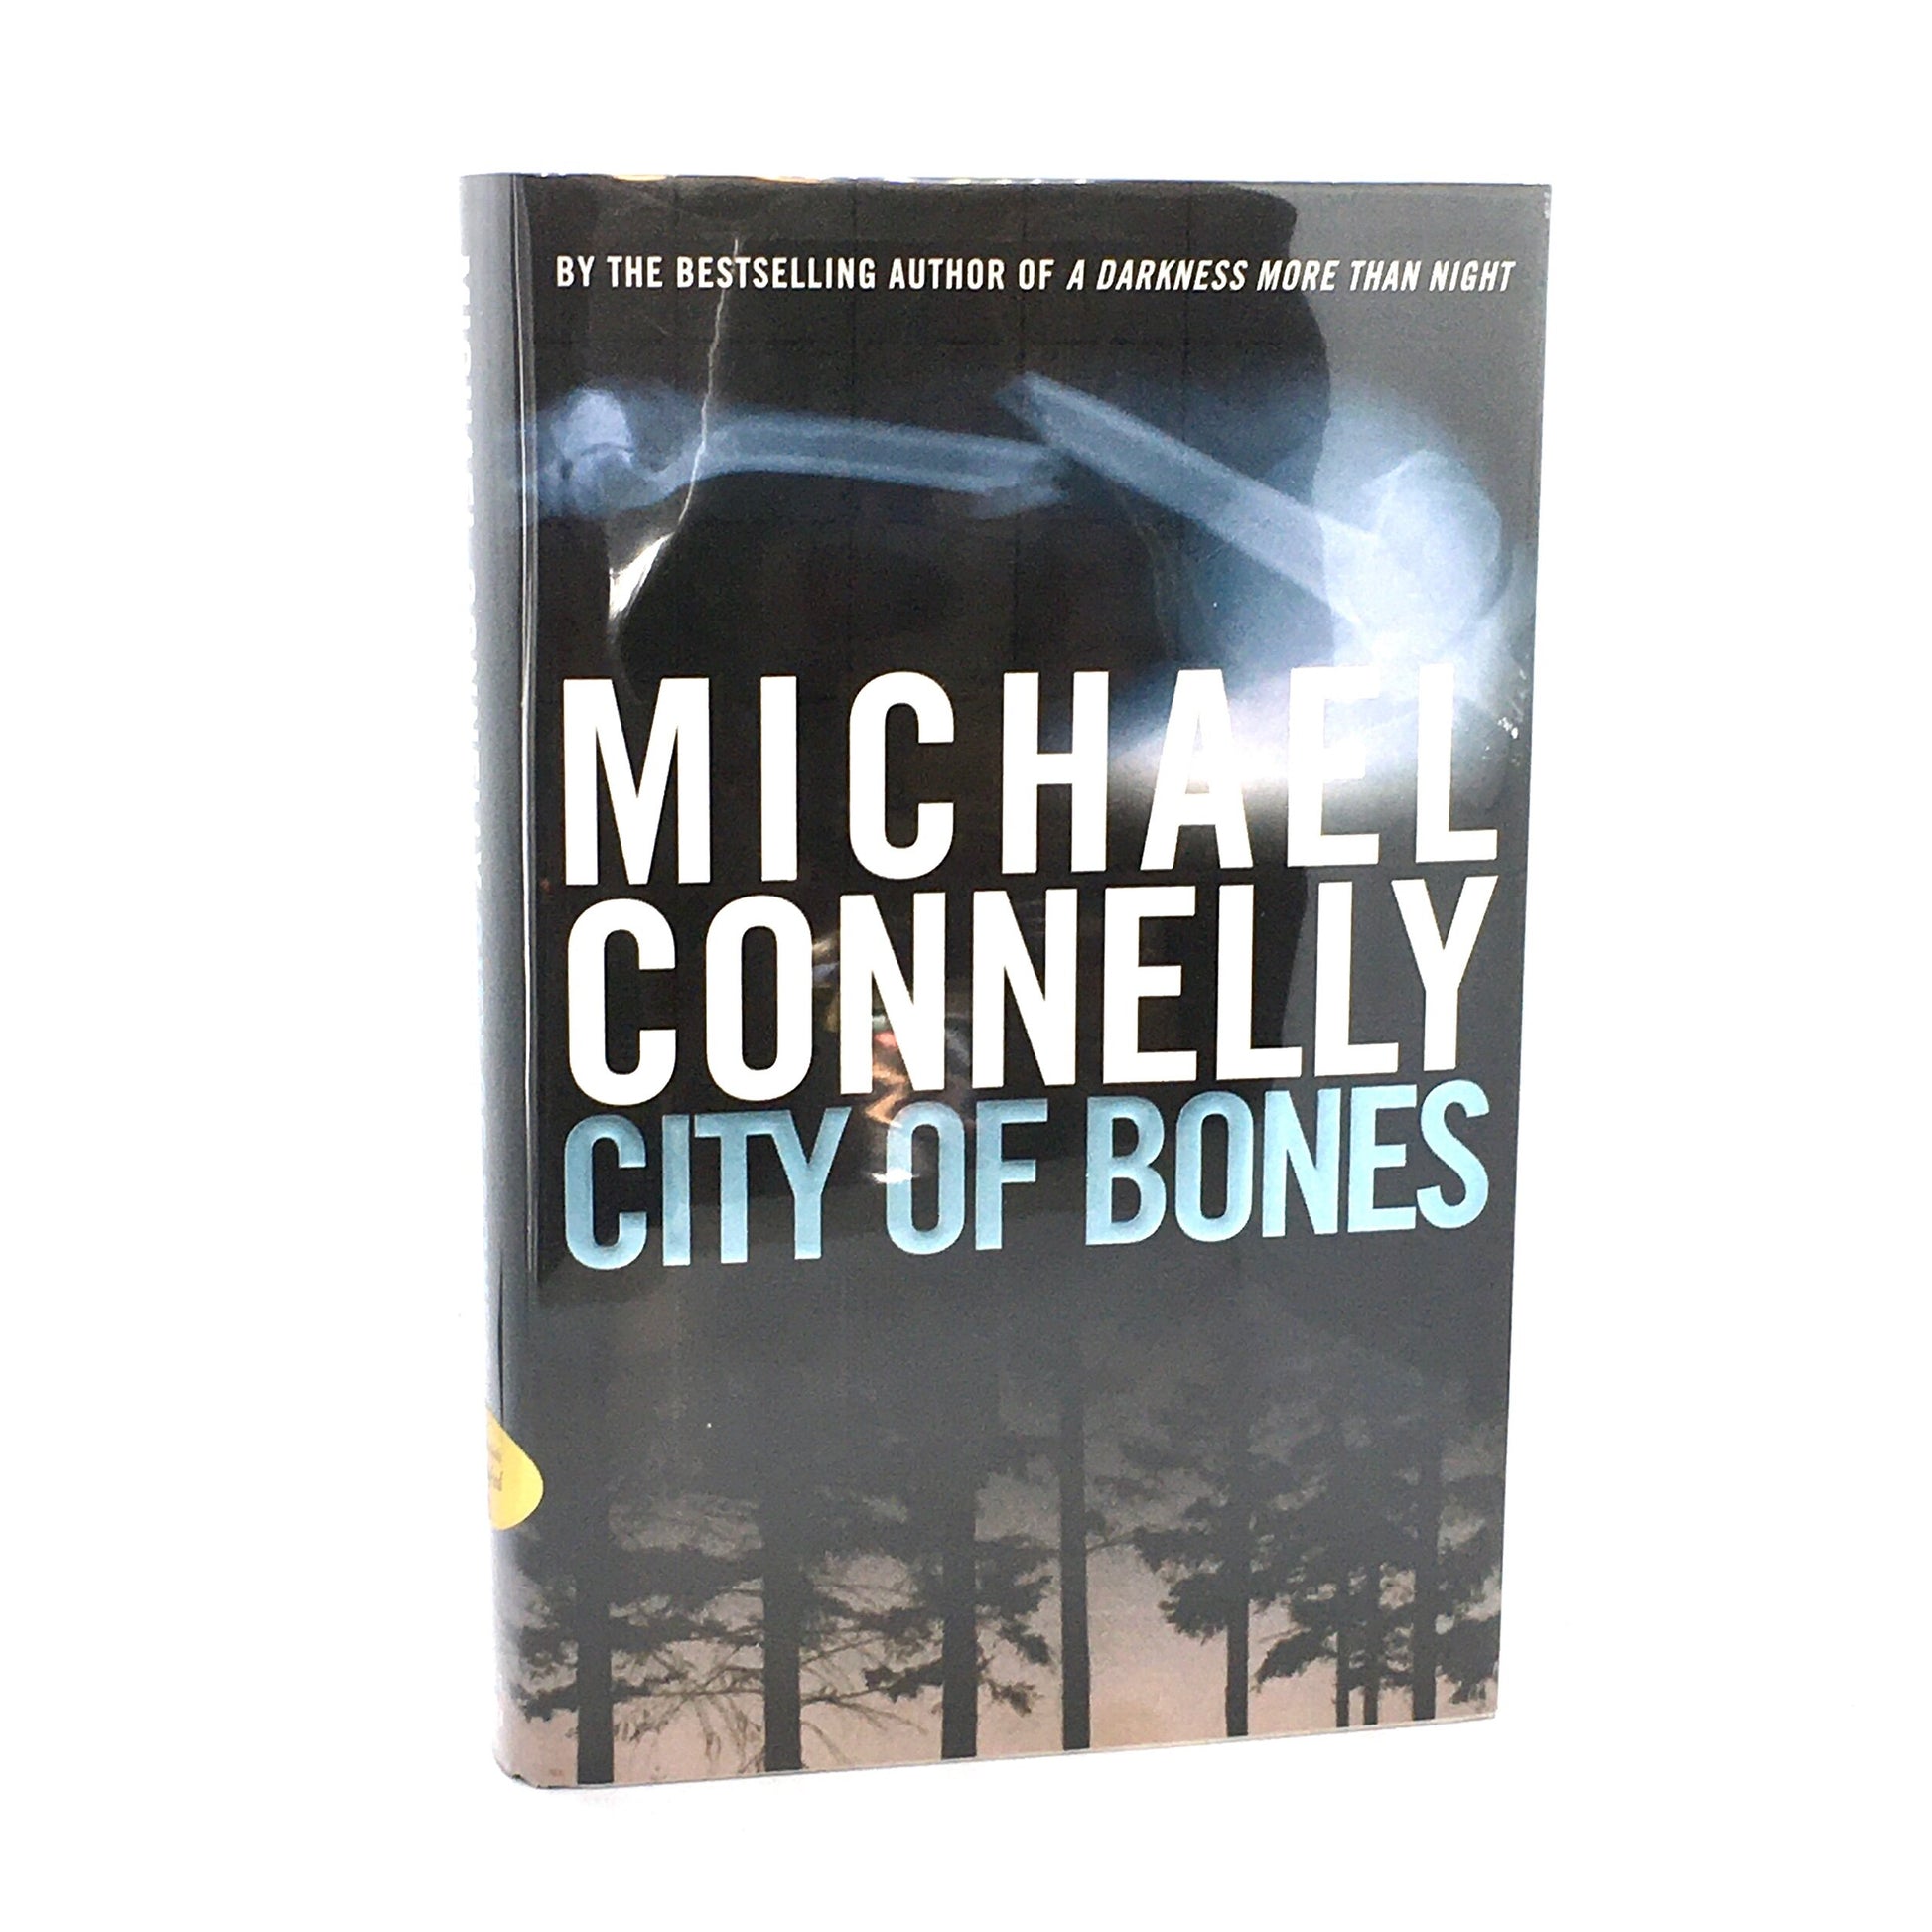 CONNELLY, Michael "City of Bones" [Little, Brown & Co, 2002] 1st Edition (Signed) - Buzz Bookstore